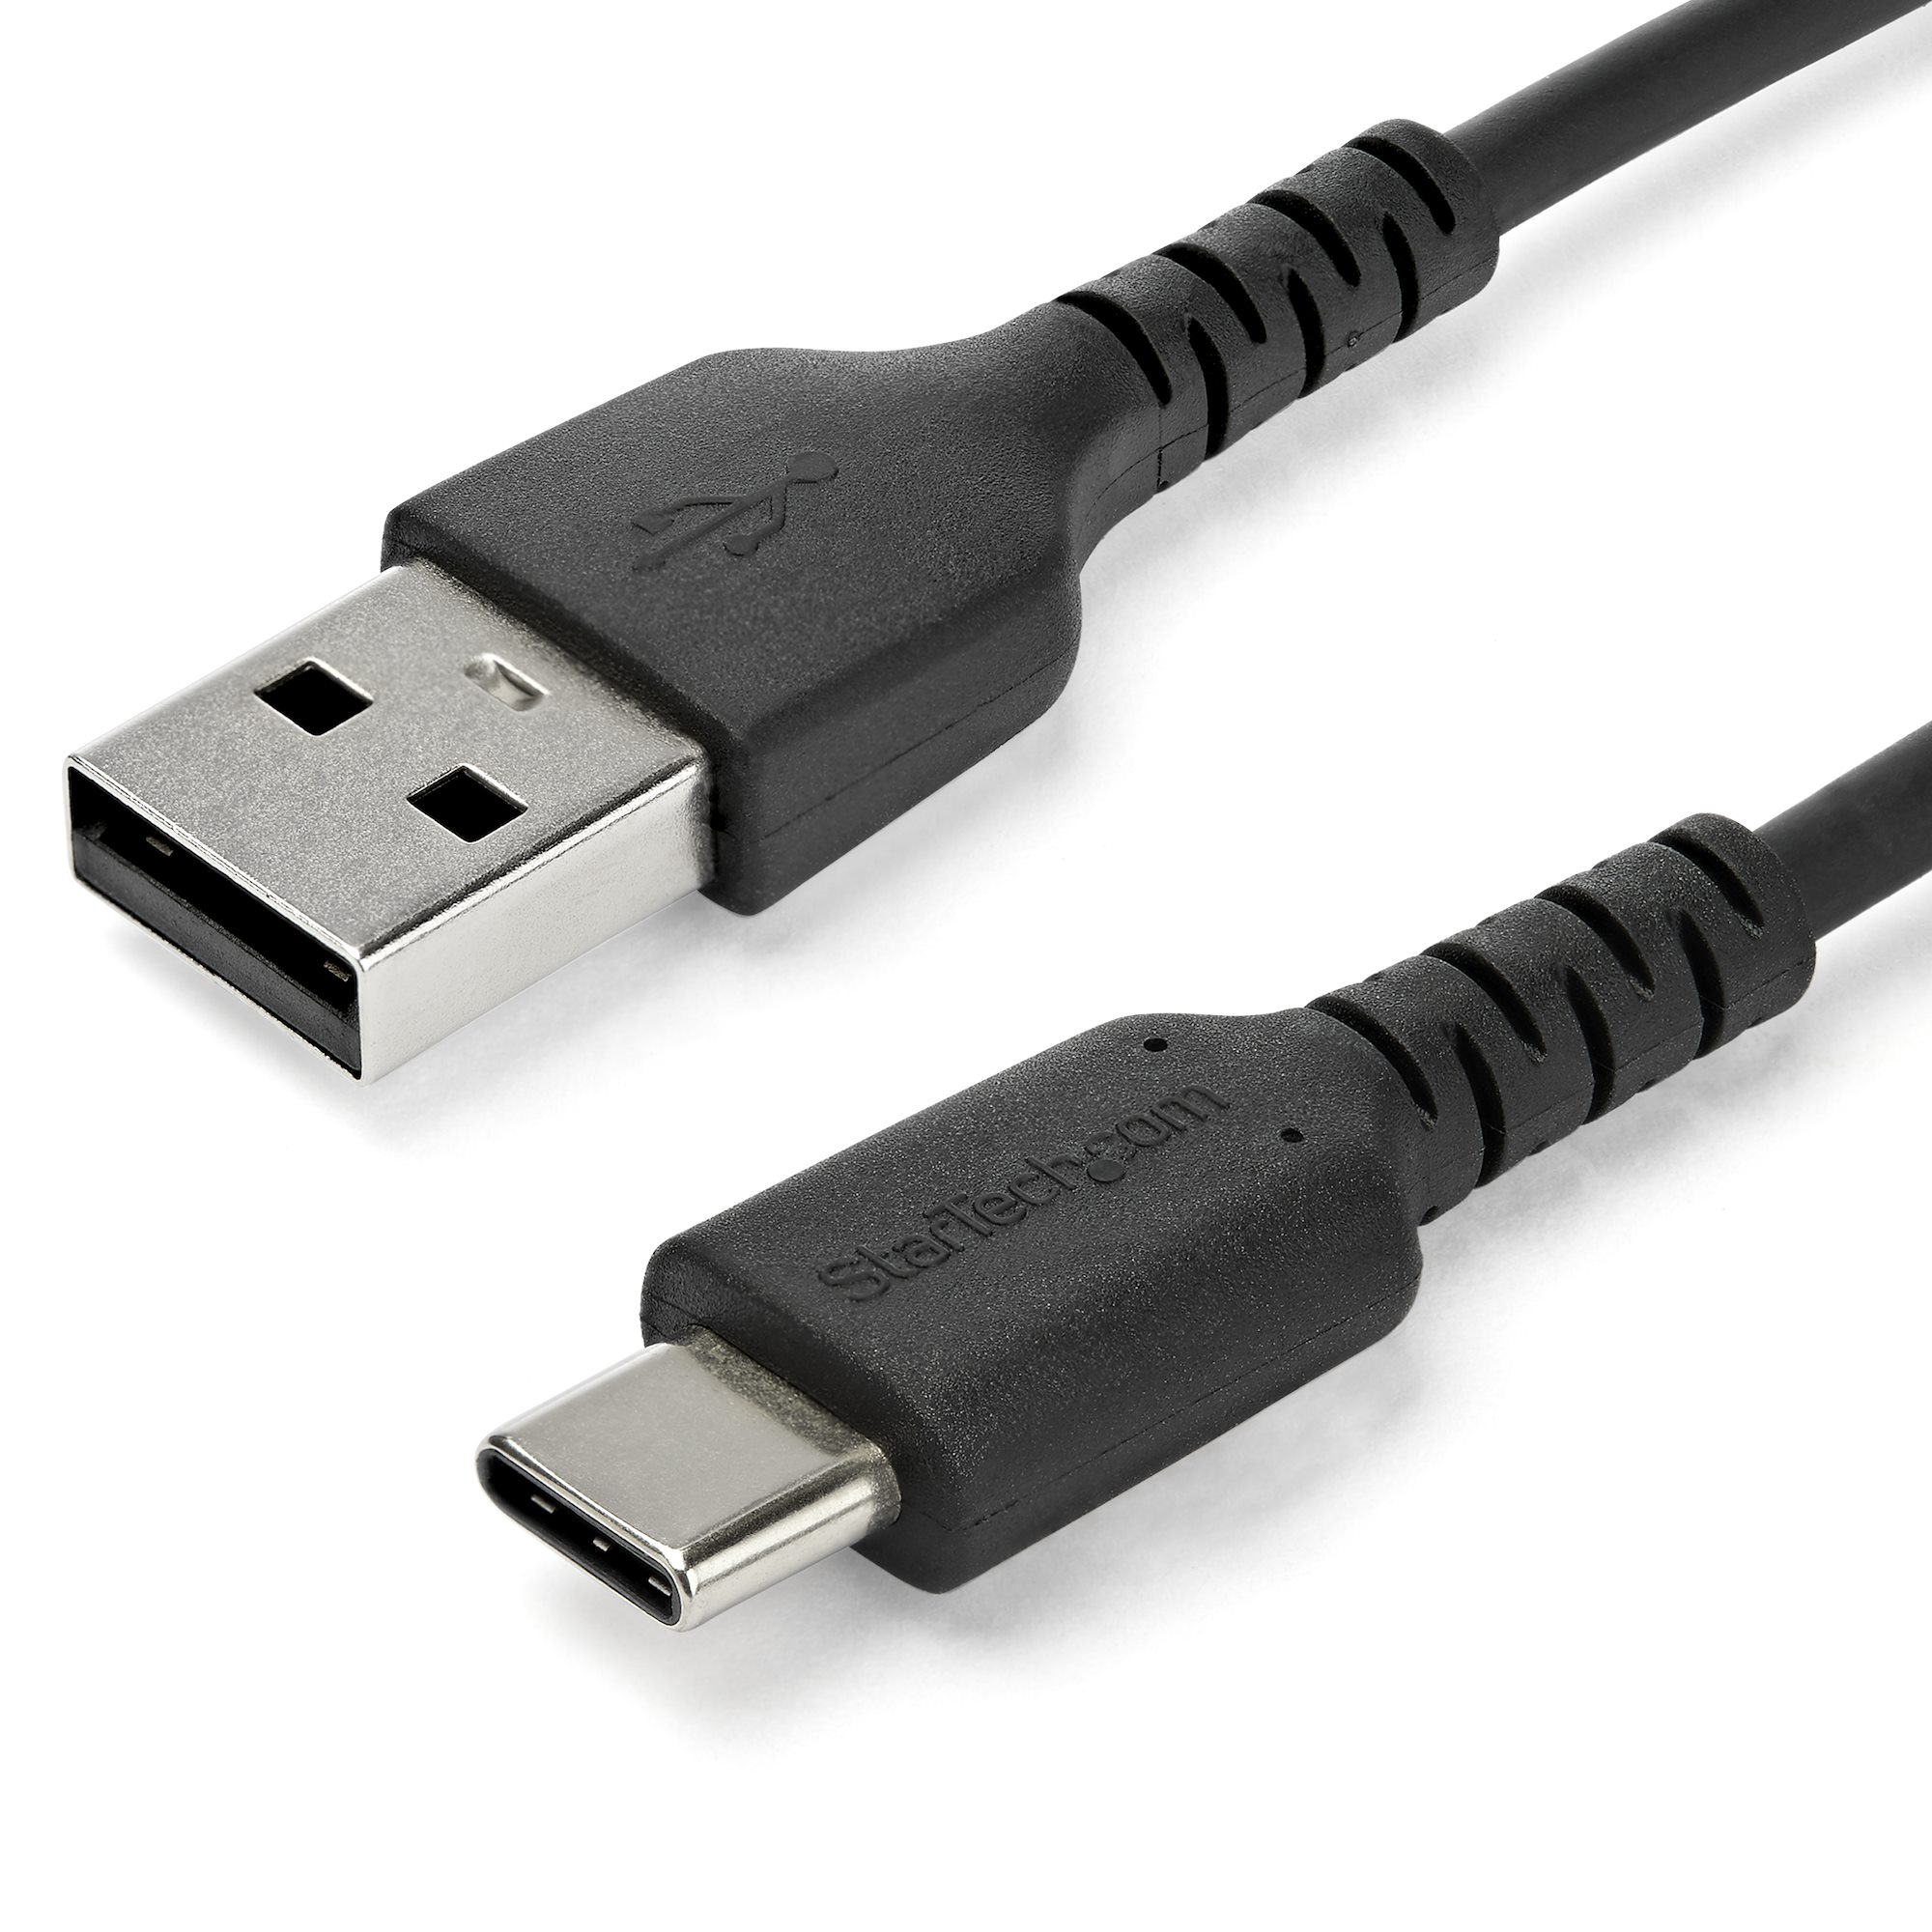 2m USB A to USB C Charging Cable Durable - Cables | StarTech.com